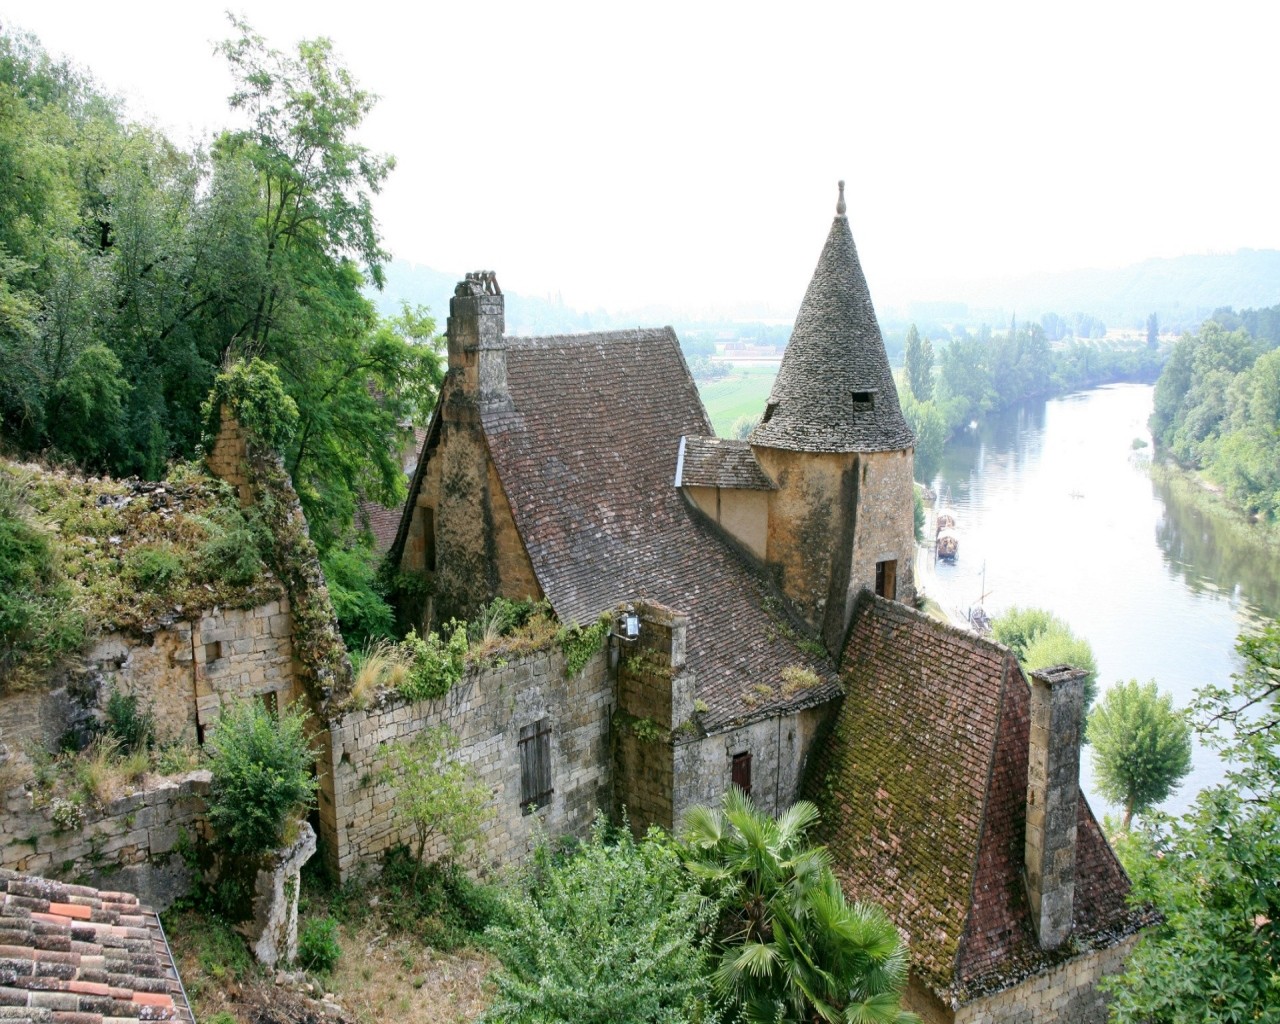 General 1280x1024 river overgrown abandoned castle ruins